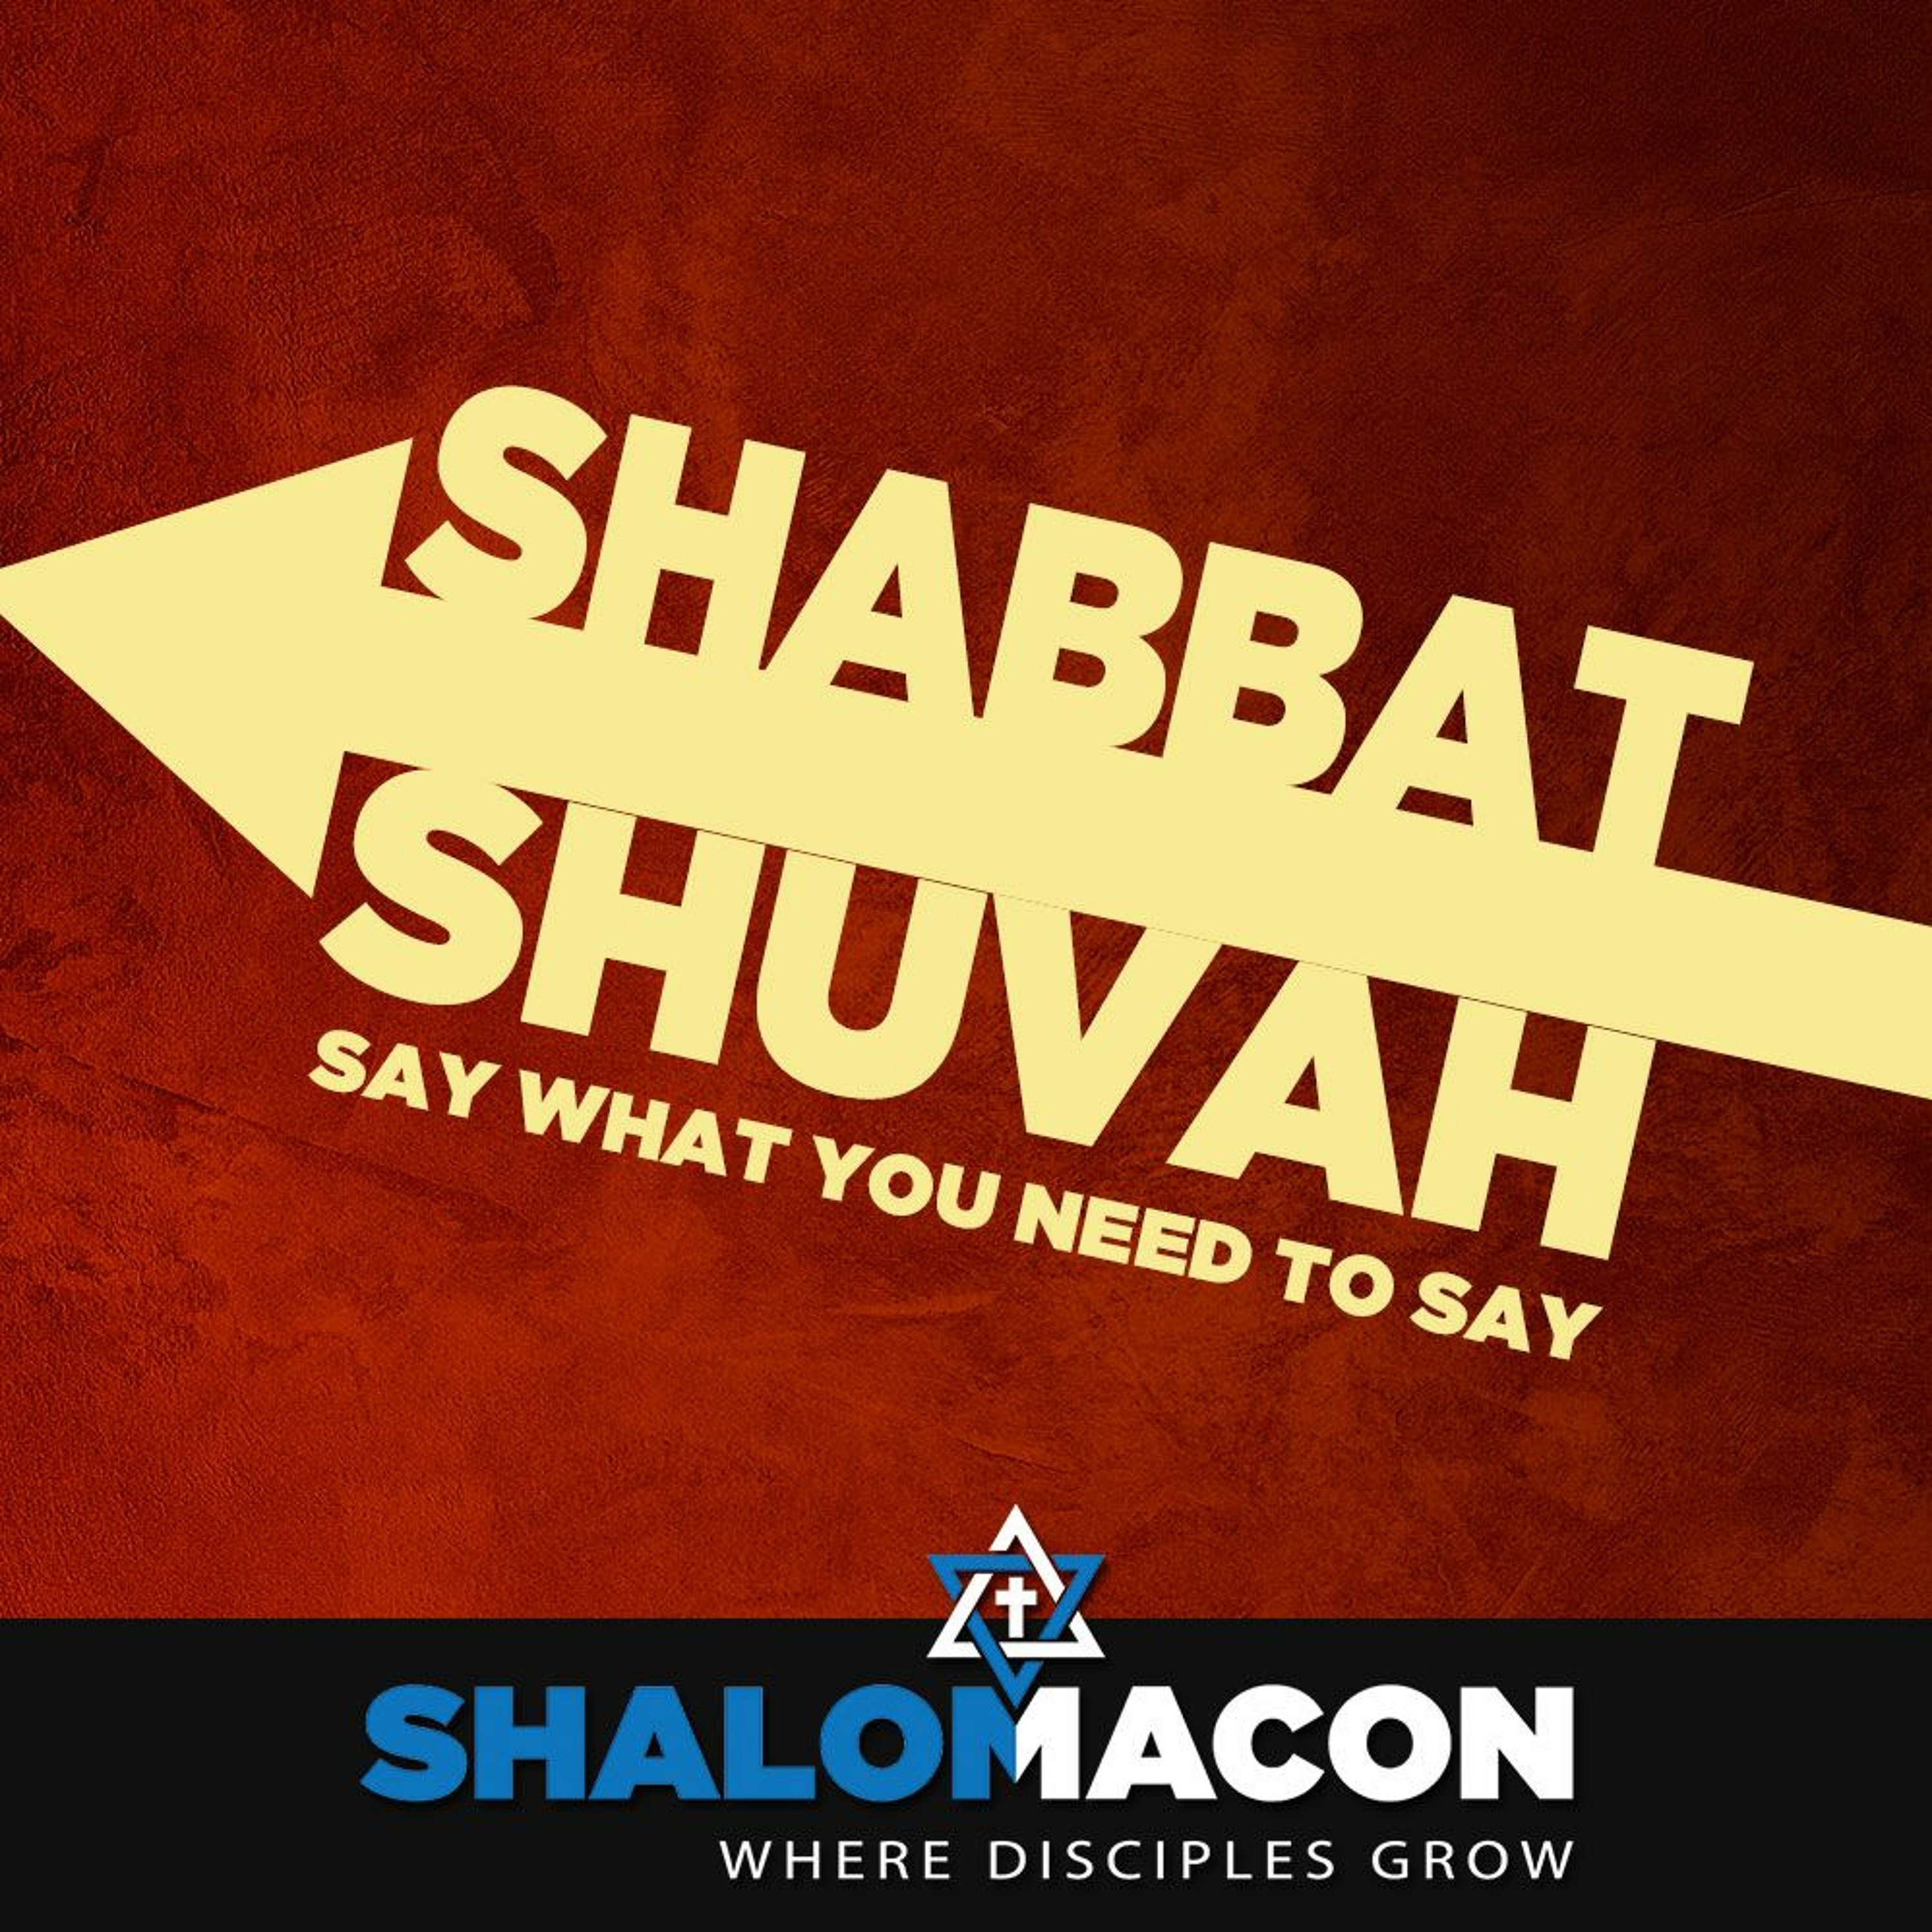 Shabbat Shuvah - Say What You Need To Say